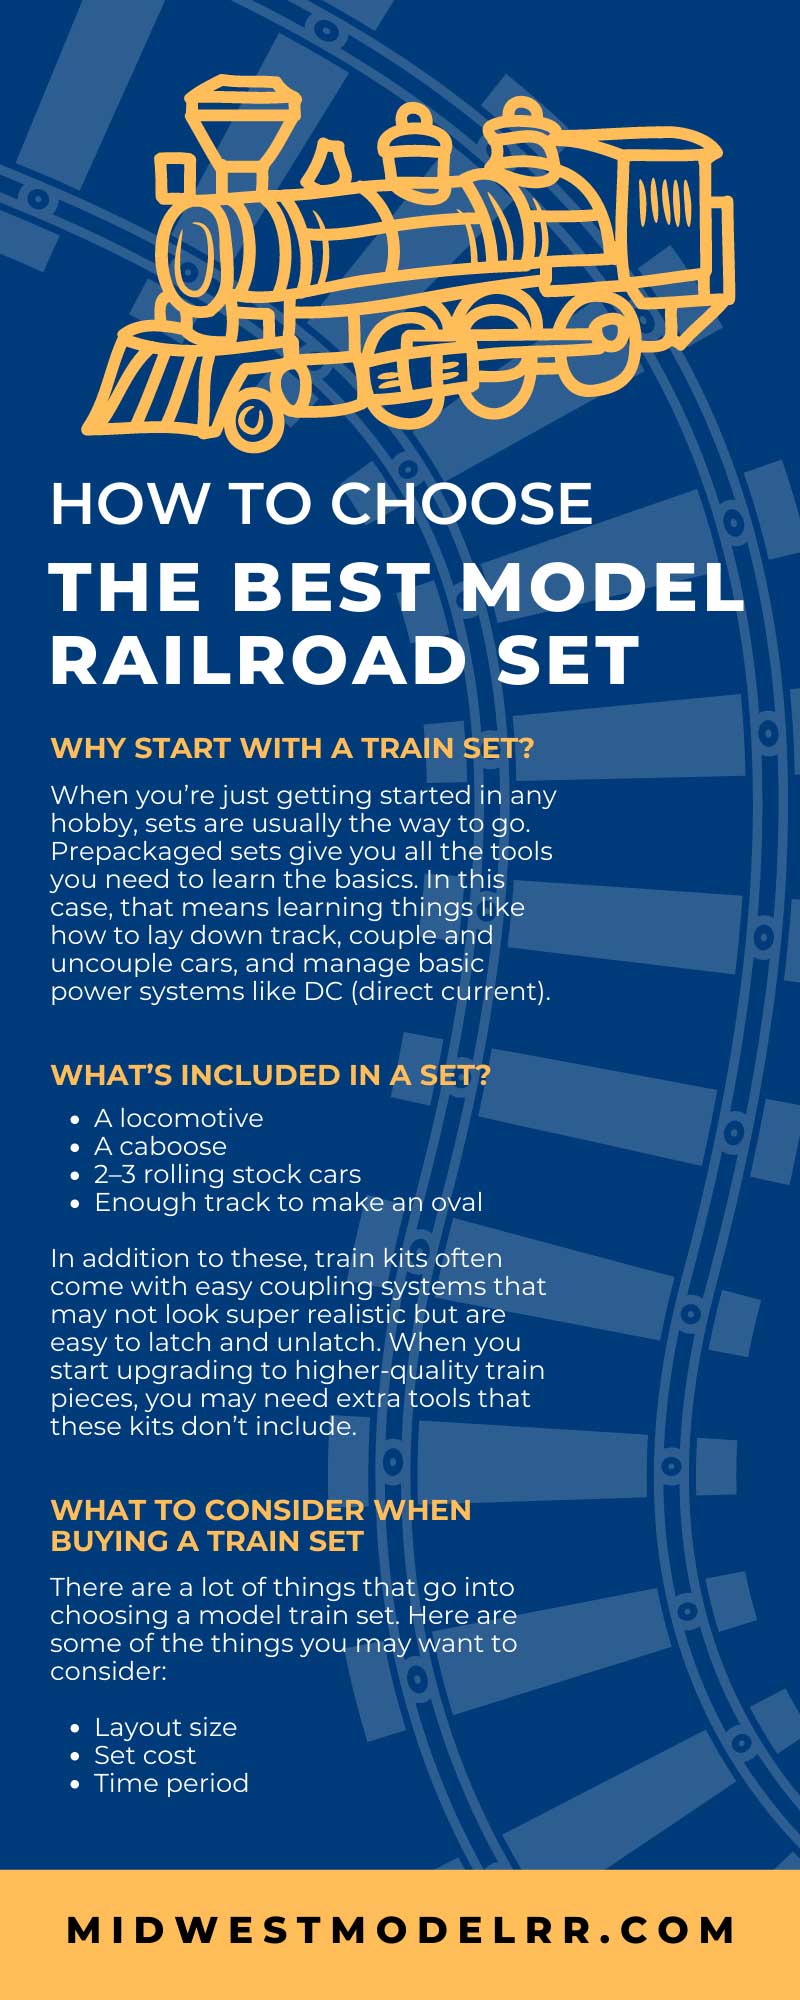 How To Choose the Best Model Railroad Set